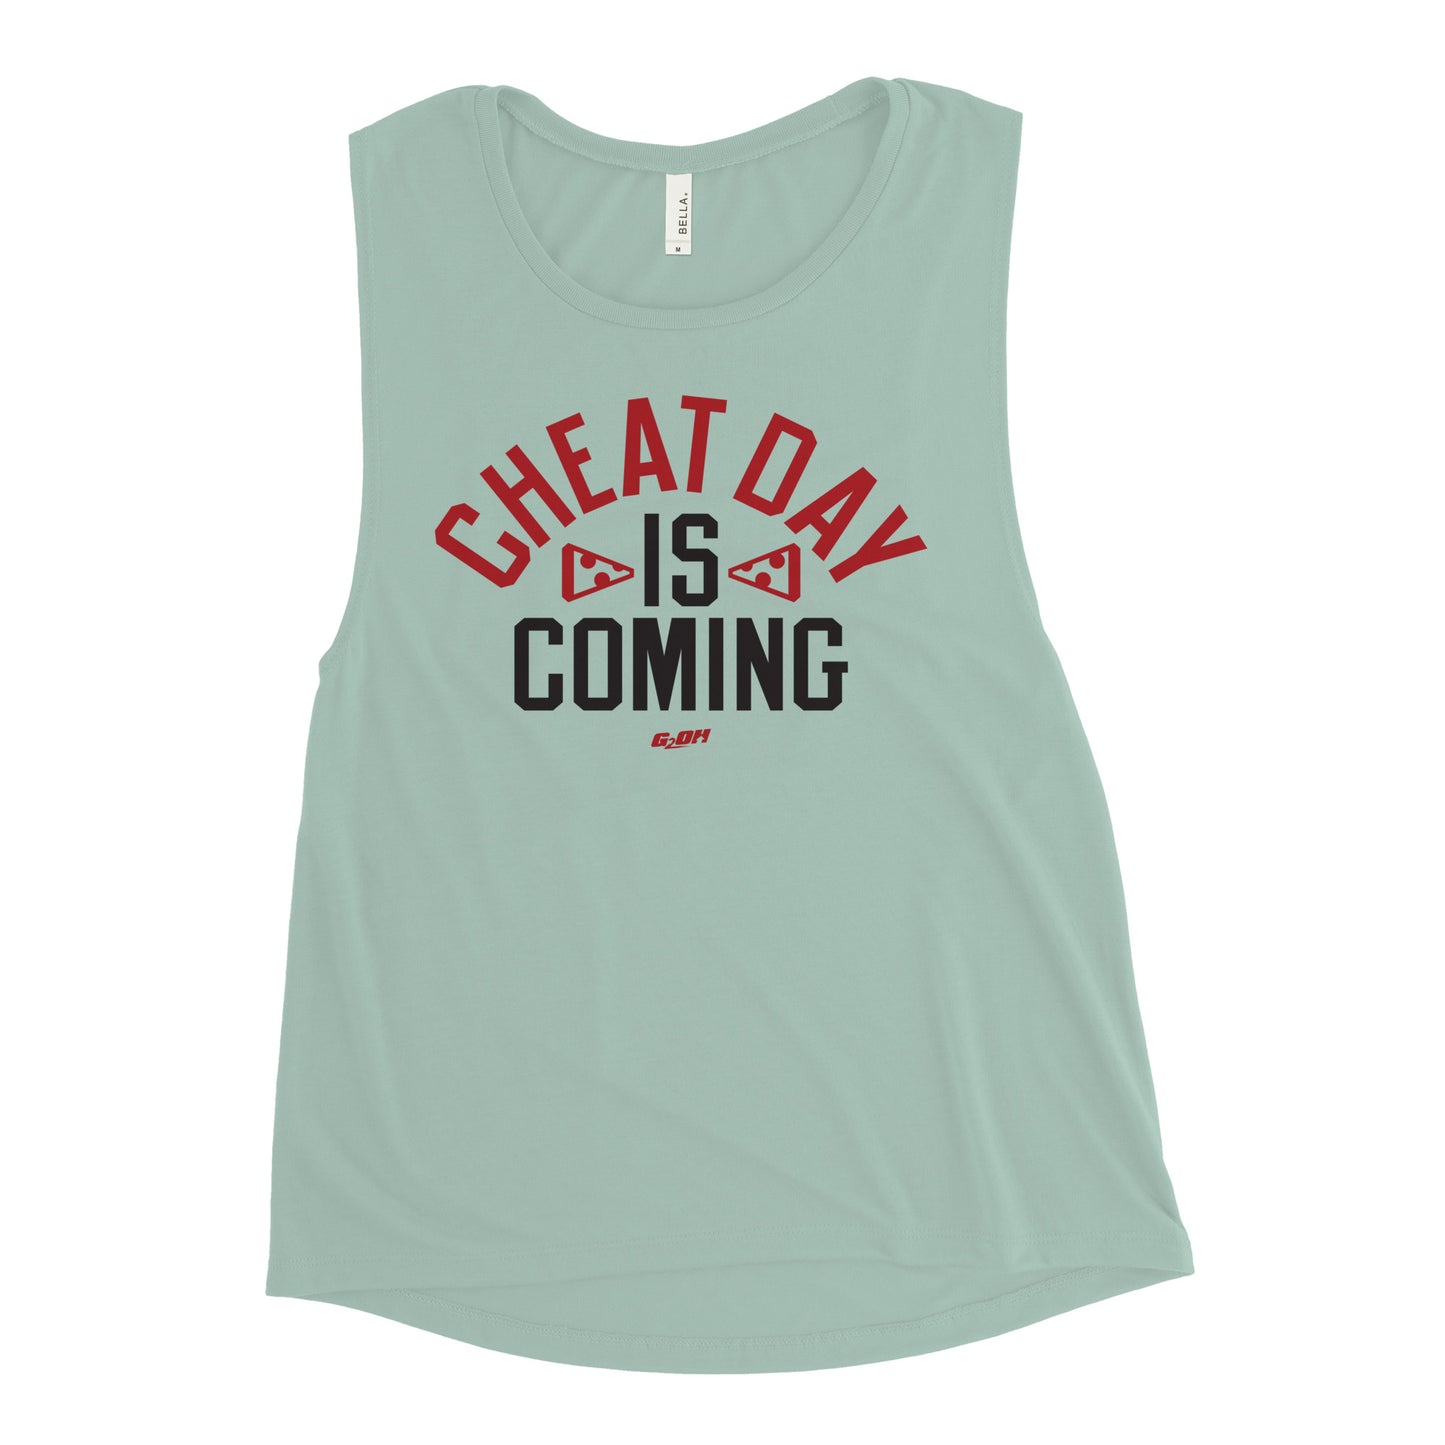 Cheat Day Is Coming Women's Muscle Tank